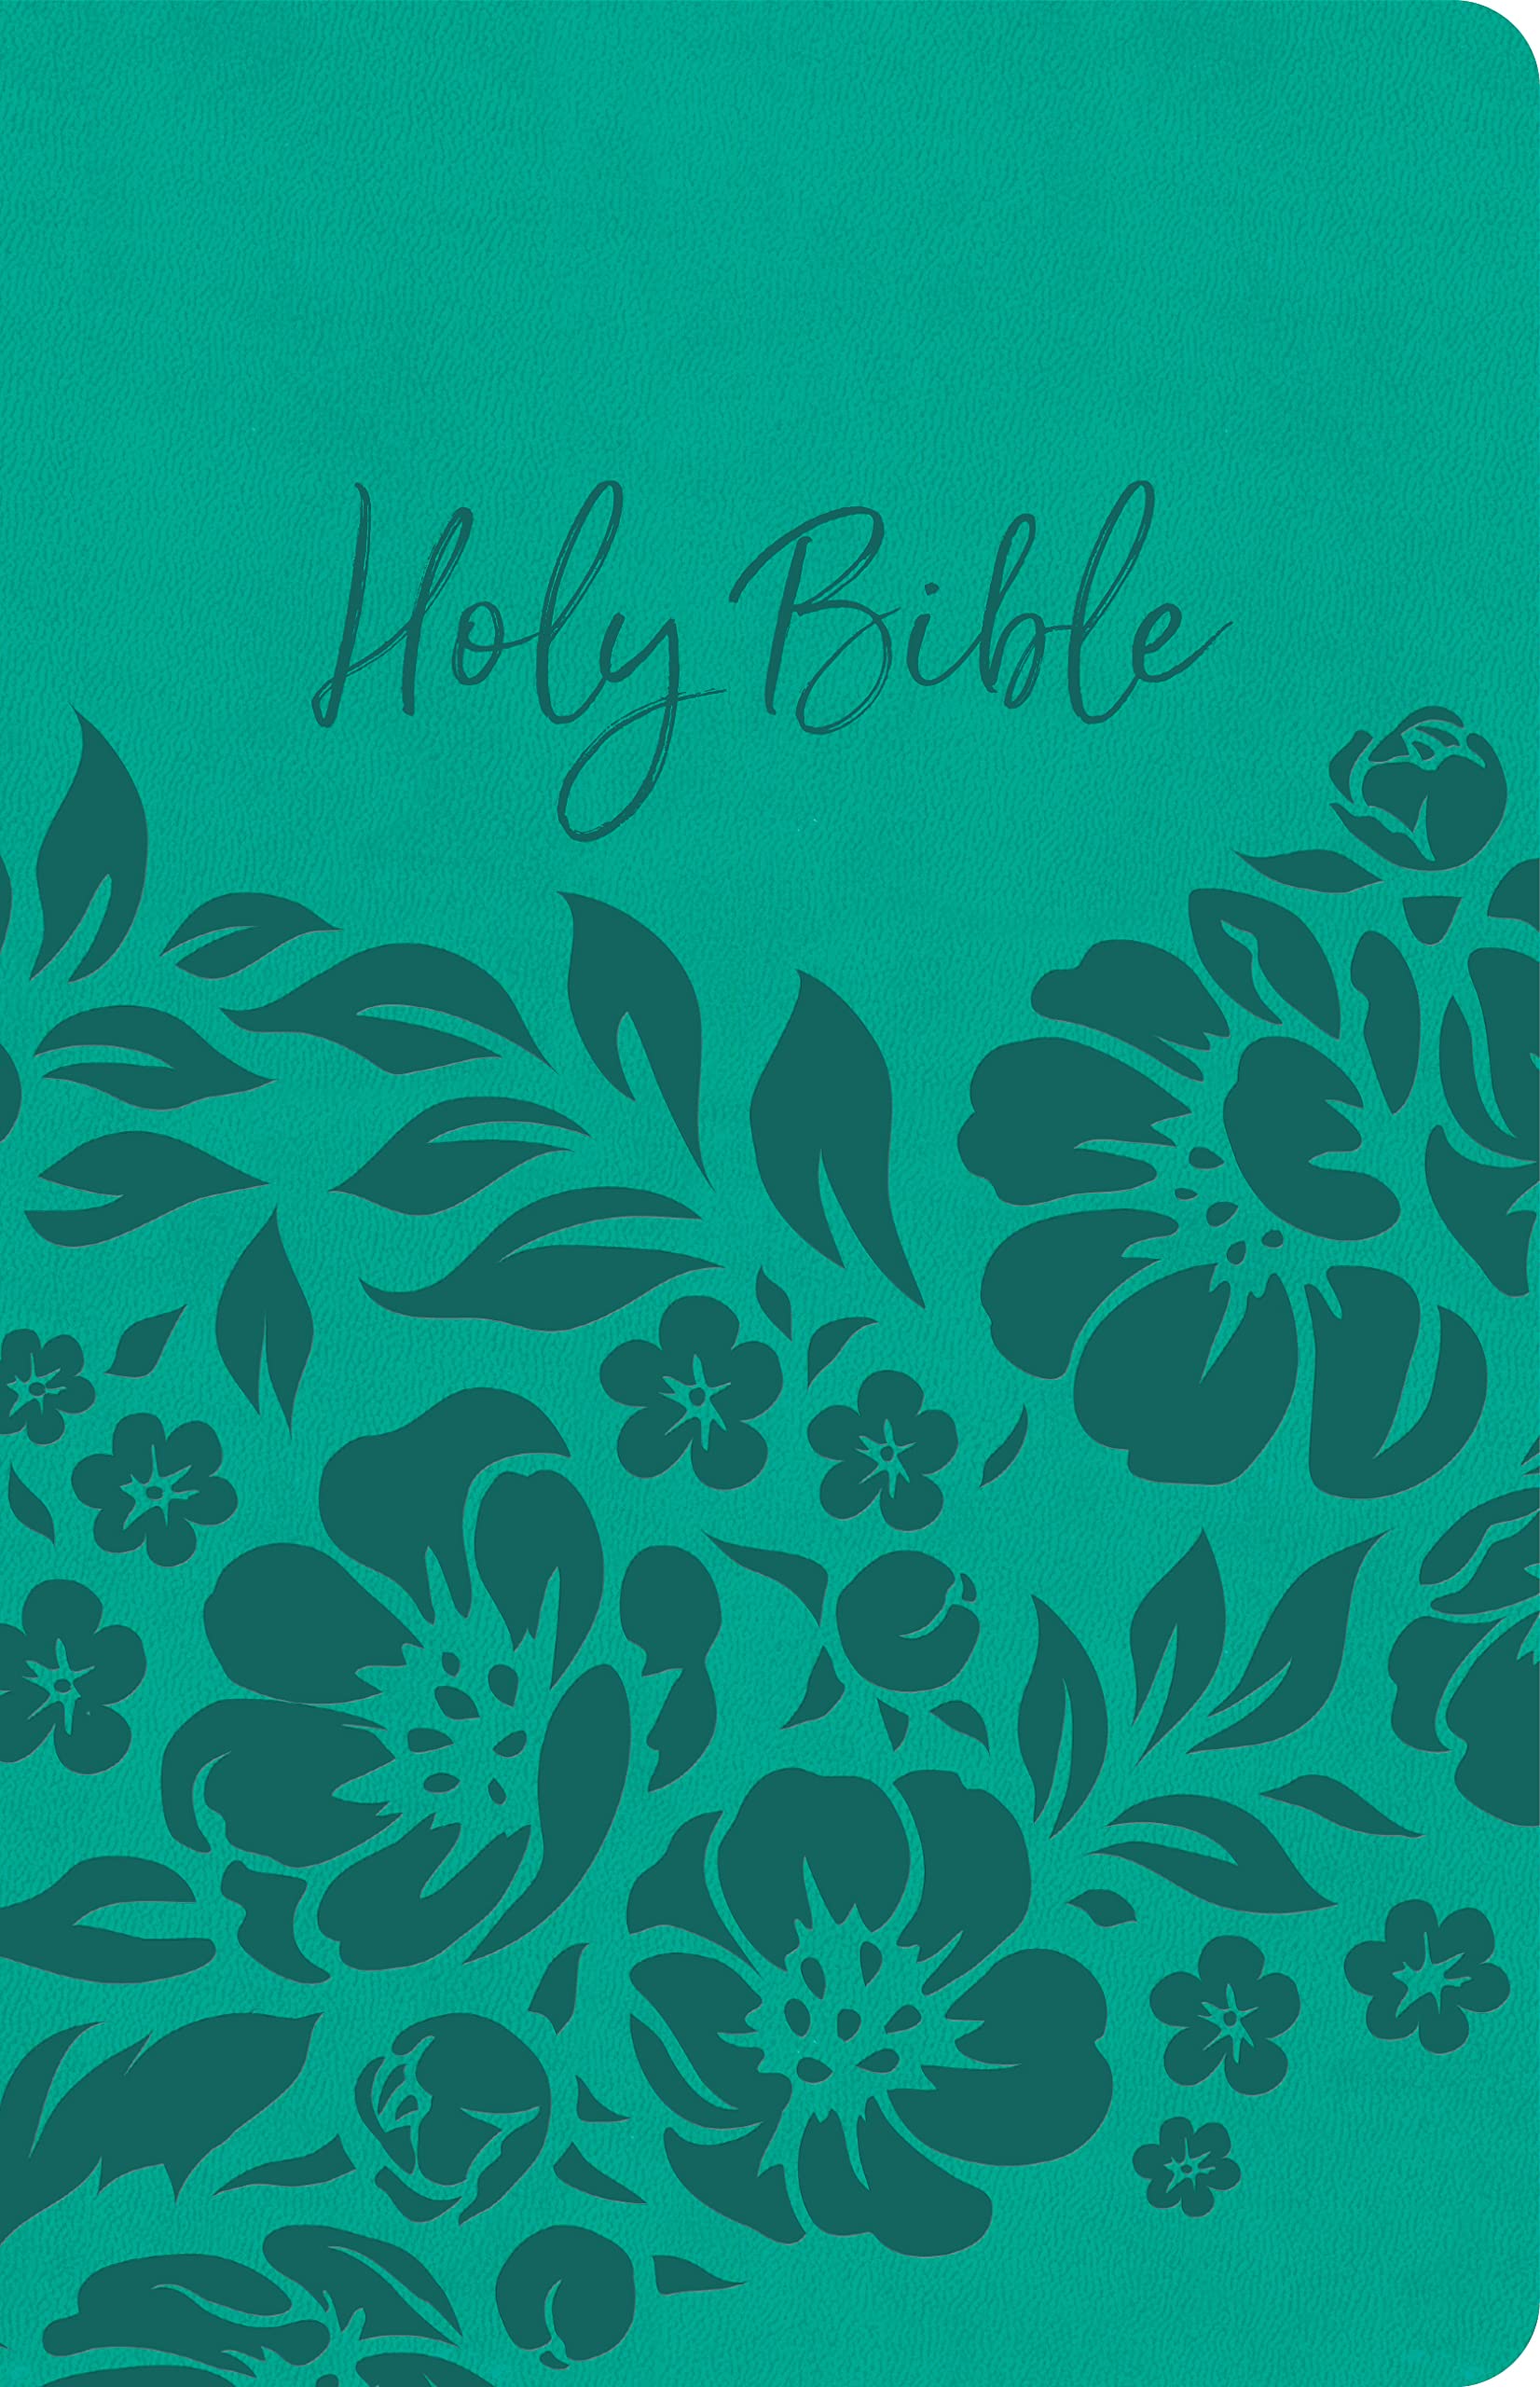 KJV Thinline Bible, Teal LeatherTouch, Value Edition, Red Letter, Pure Cambridge Text, Presentation Page, Full-Color Maps, Easy-to-Read Bible MCM Type